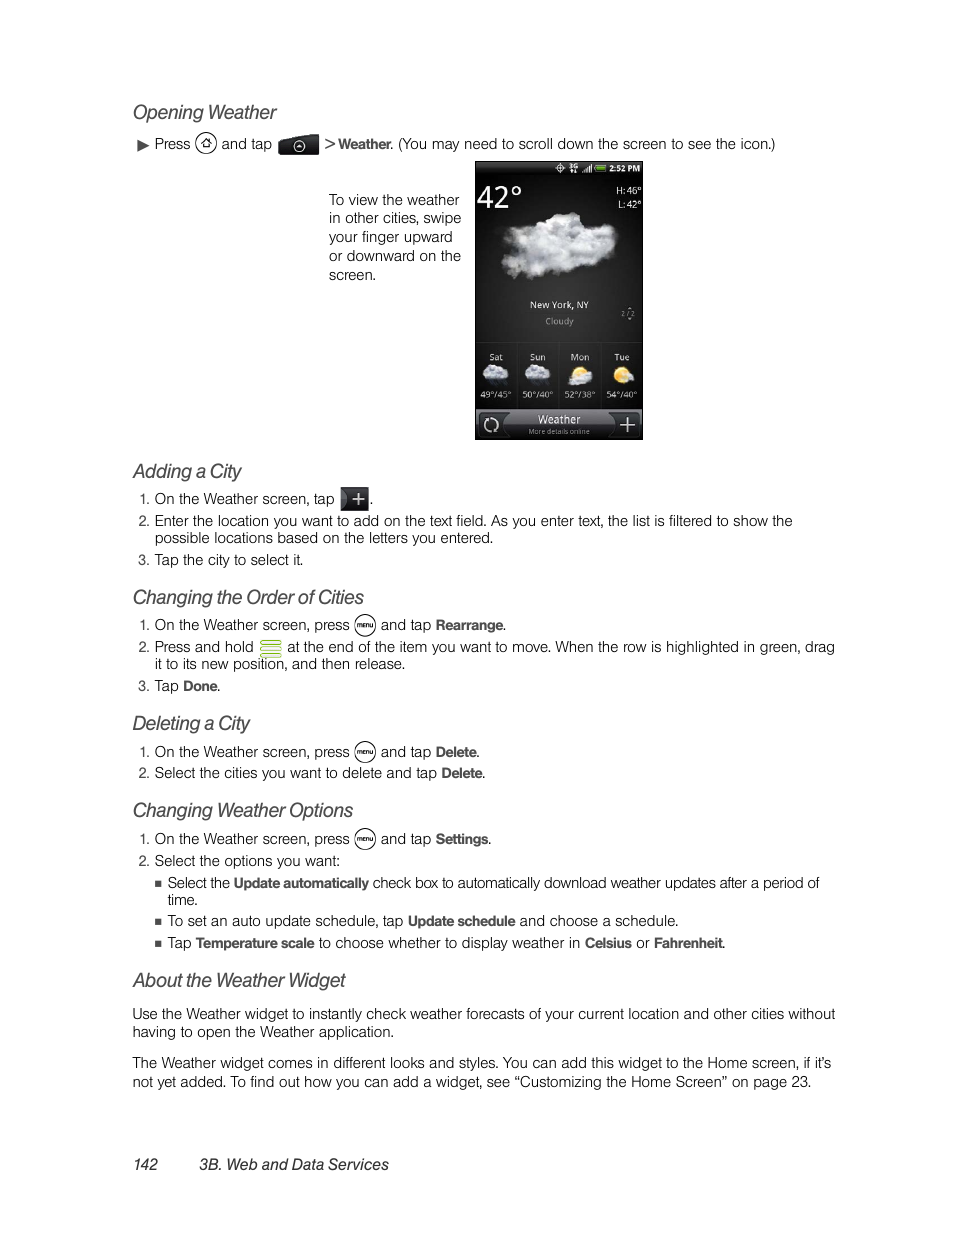 Opening weather, Adding a city, Changing the order of cities | Deleting a city, Changing weather options, About the weather widget | HTC EVO 4G User Manual | Page 152 / 197